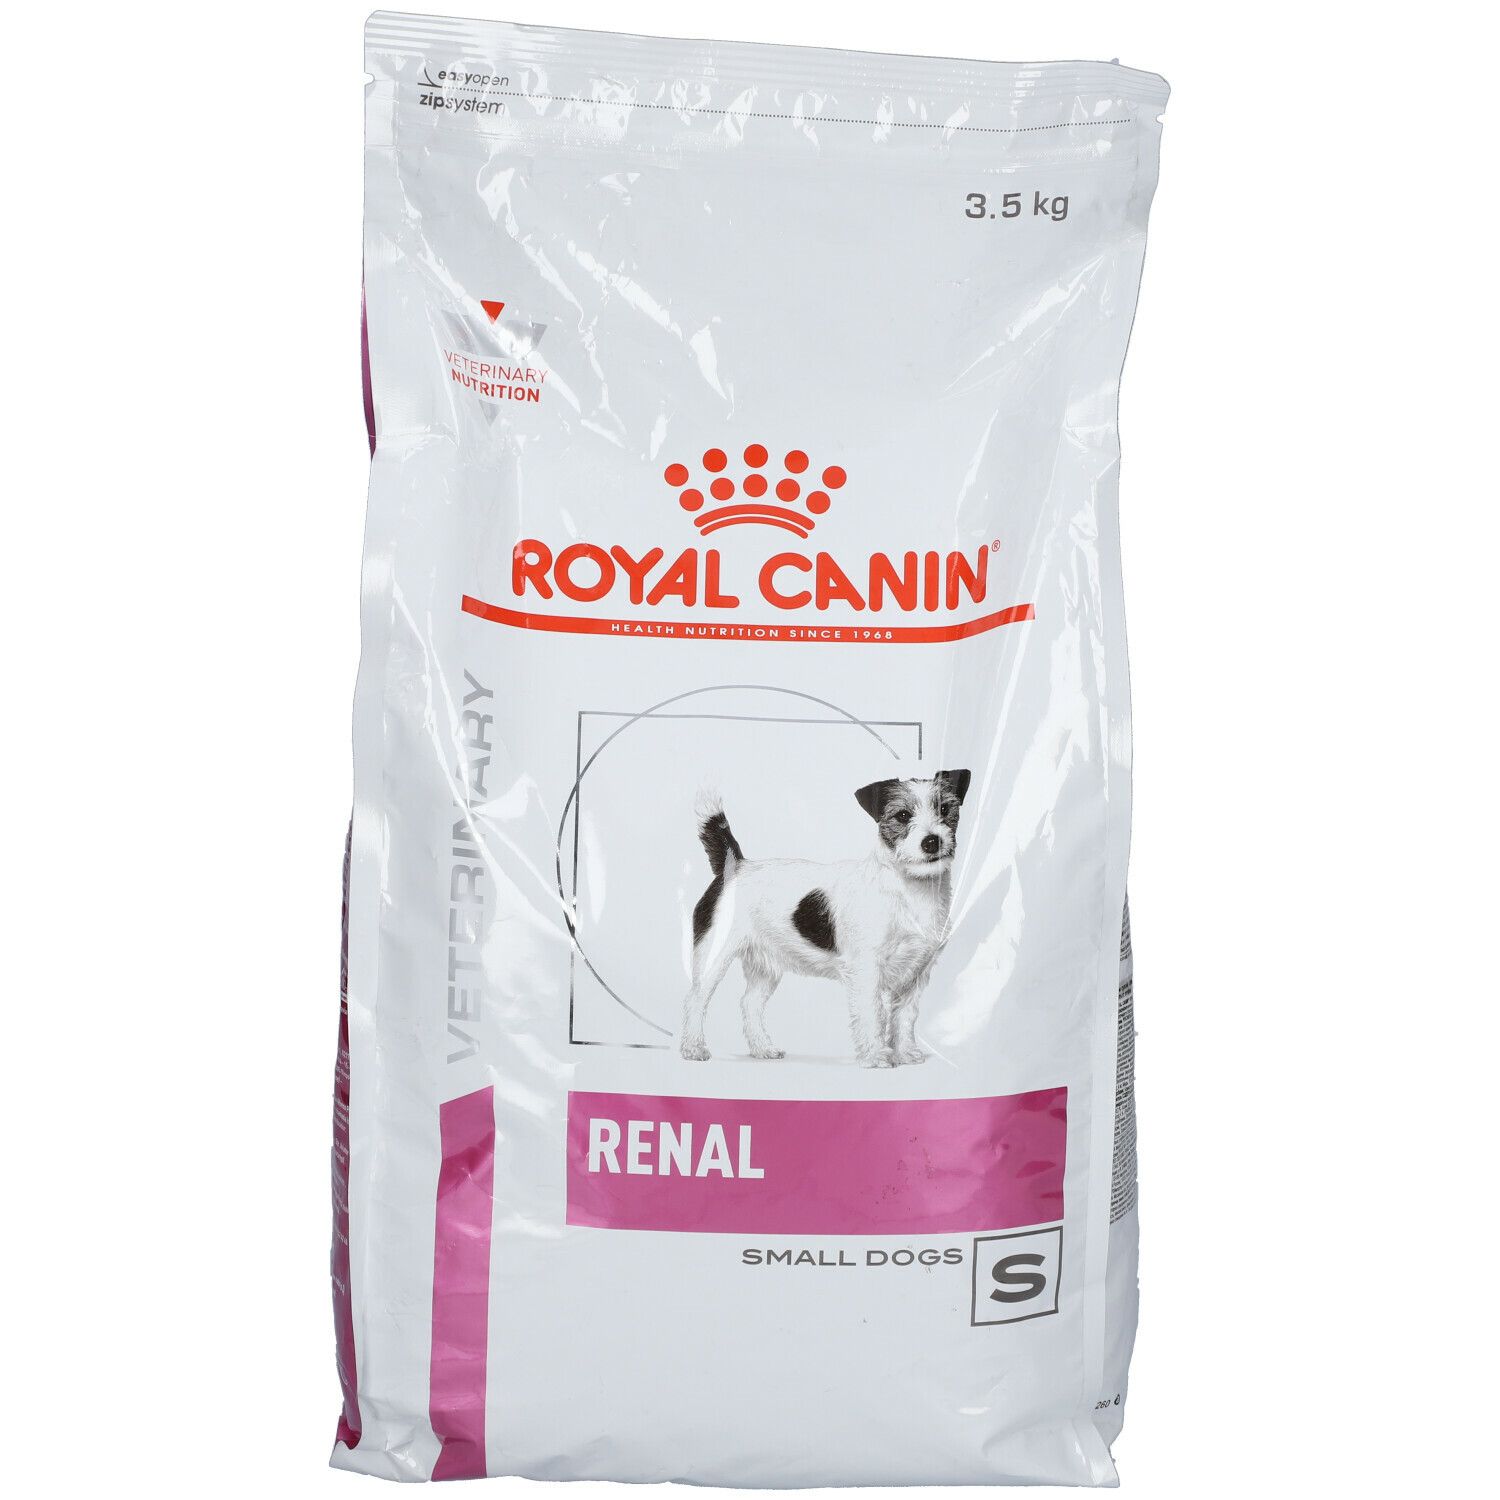 Royal Canin® Renal Small Dogs